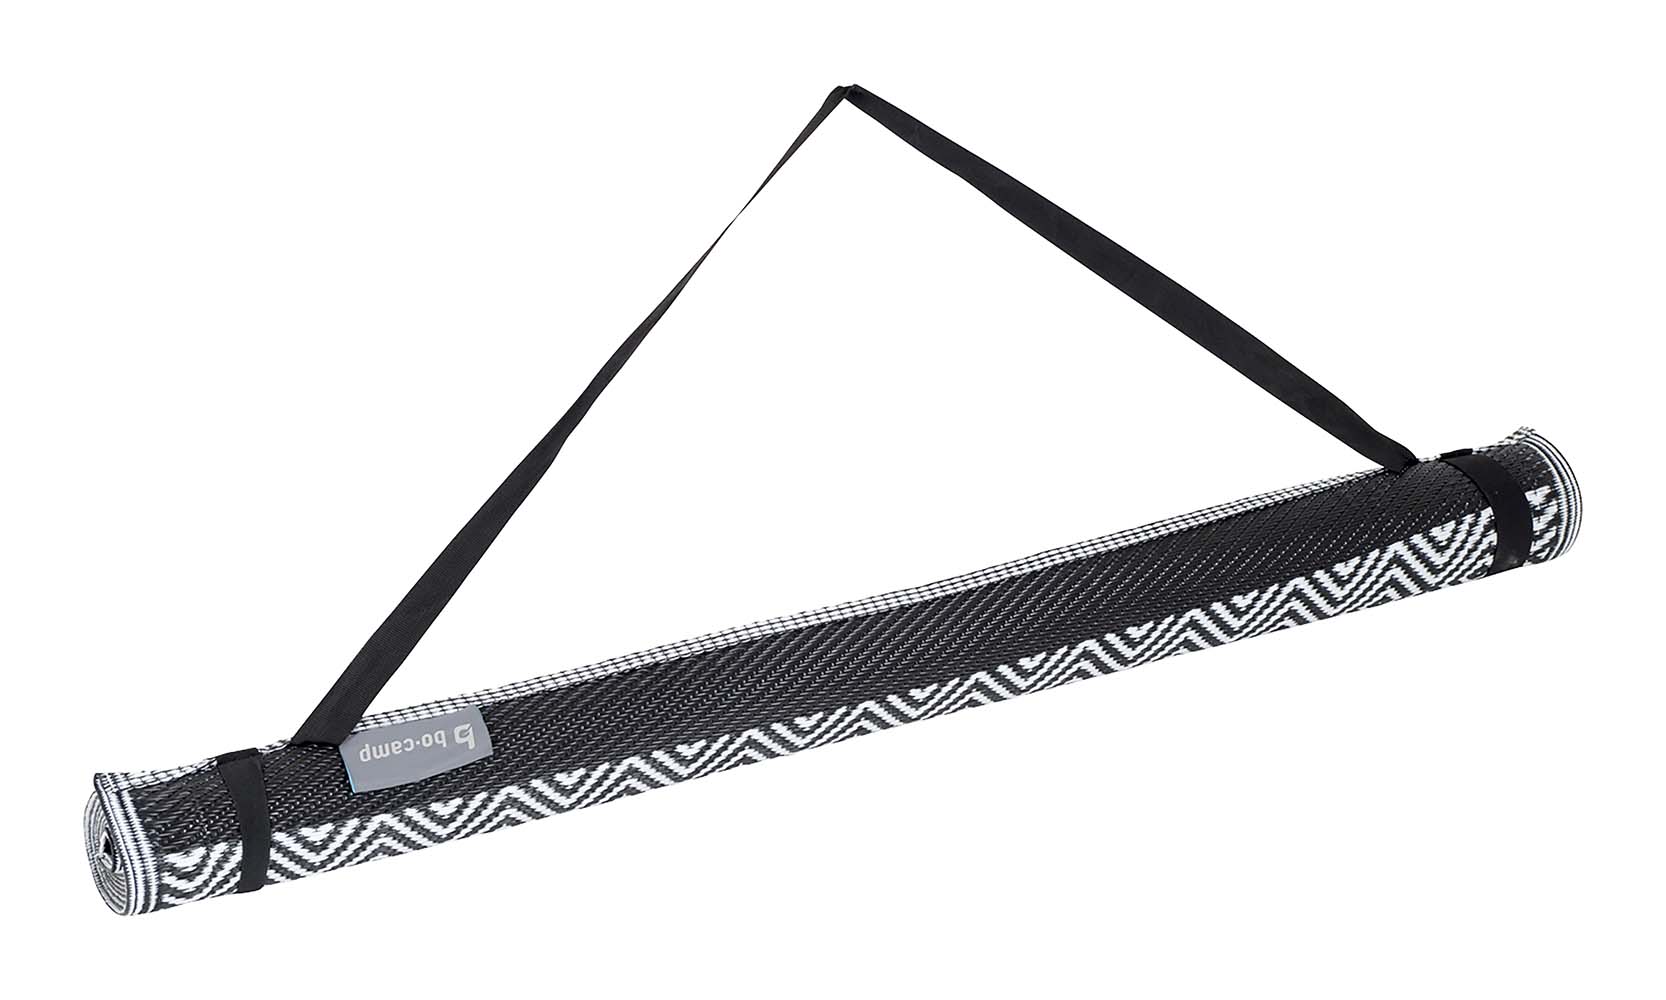 Bo-Camp - Urban Outdoor collection - Chill mat - Kingston - Beach - Black/White detail 5